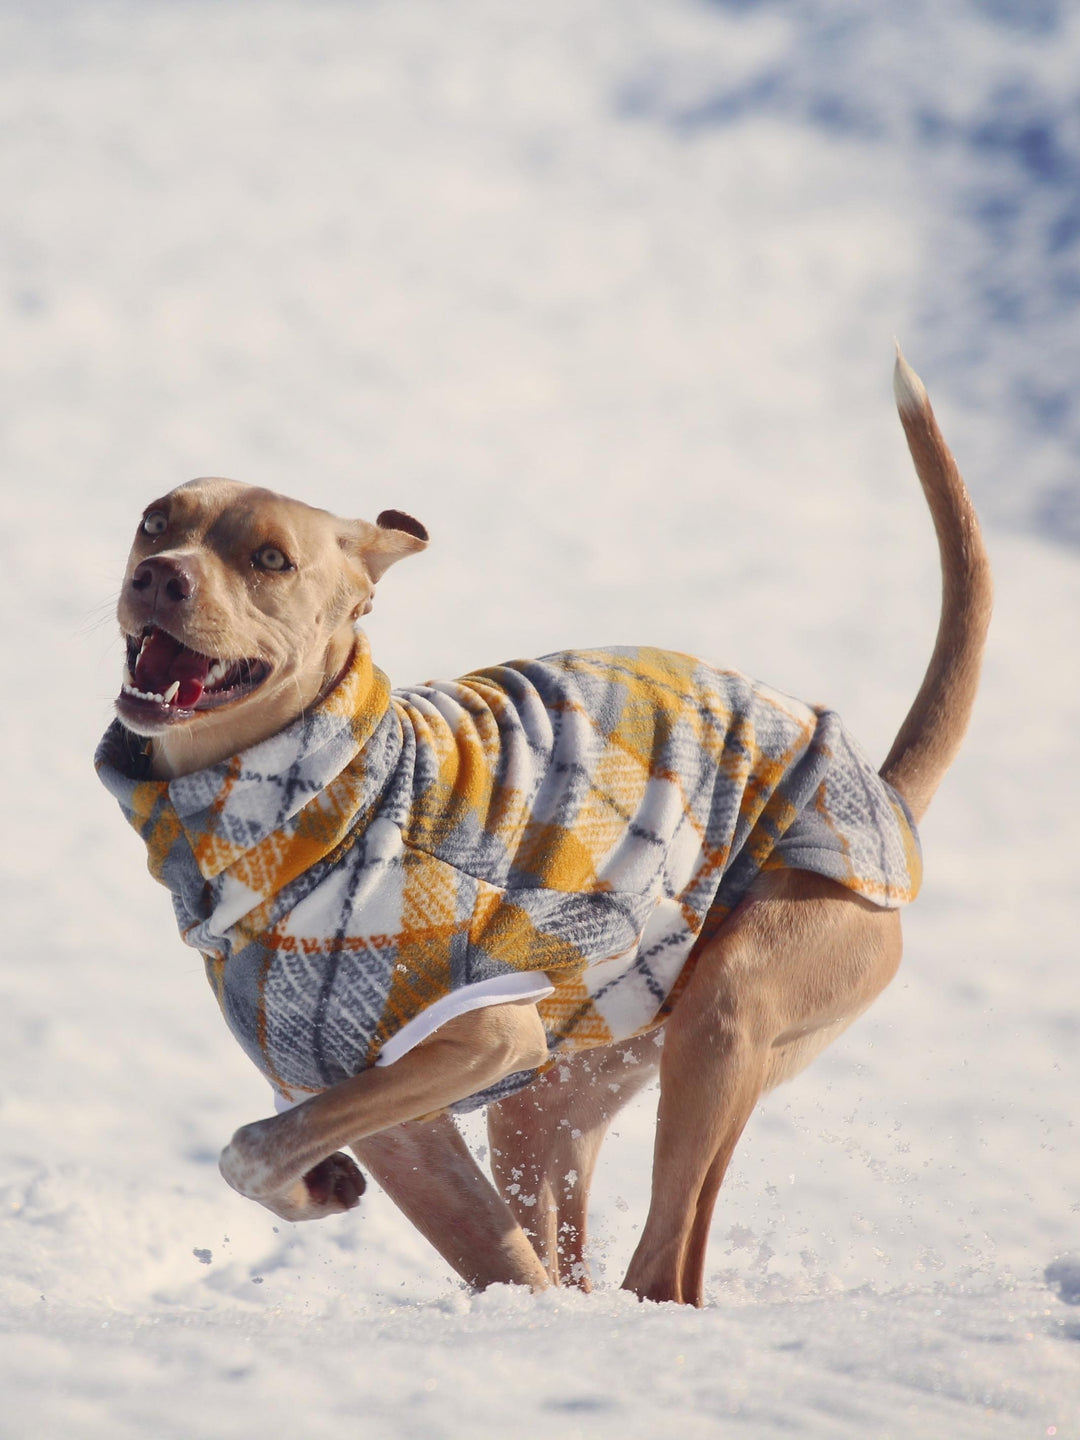 Gorgeous Labrador in the snow mountains wearing a yellow and grey plaid fleece dog sweater